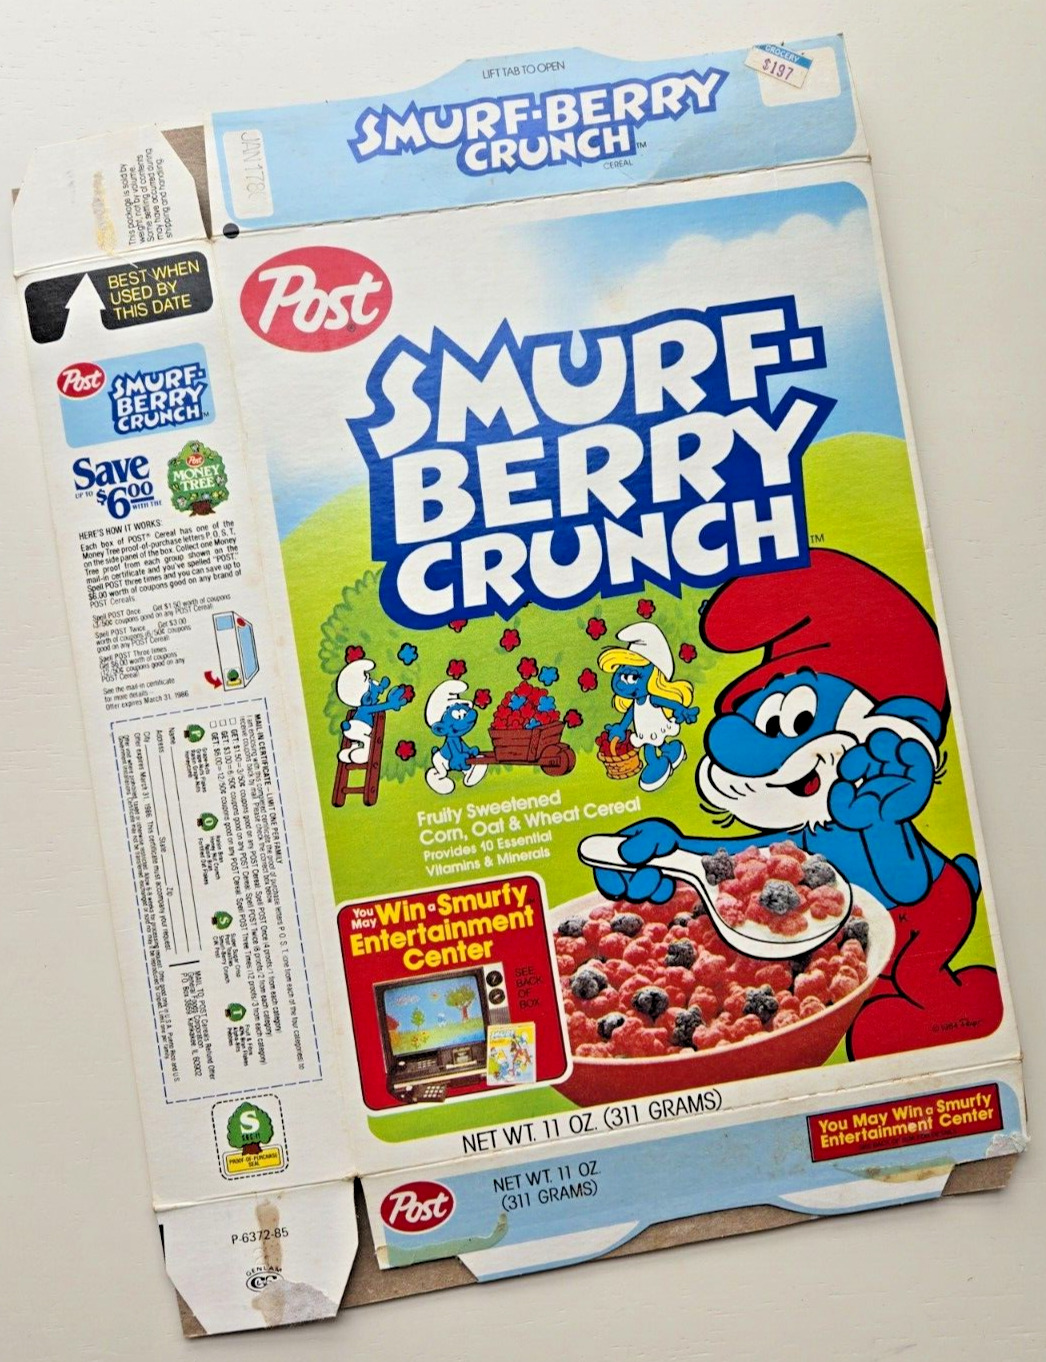 Rare Vtg 1984 Post Smurf-Berry Crunch Flat Empty Cereal Box Coleco Vision Sharp